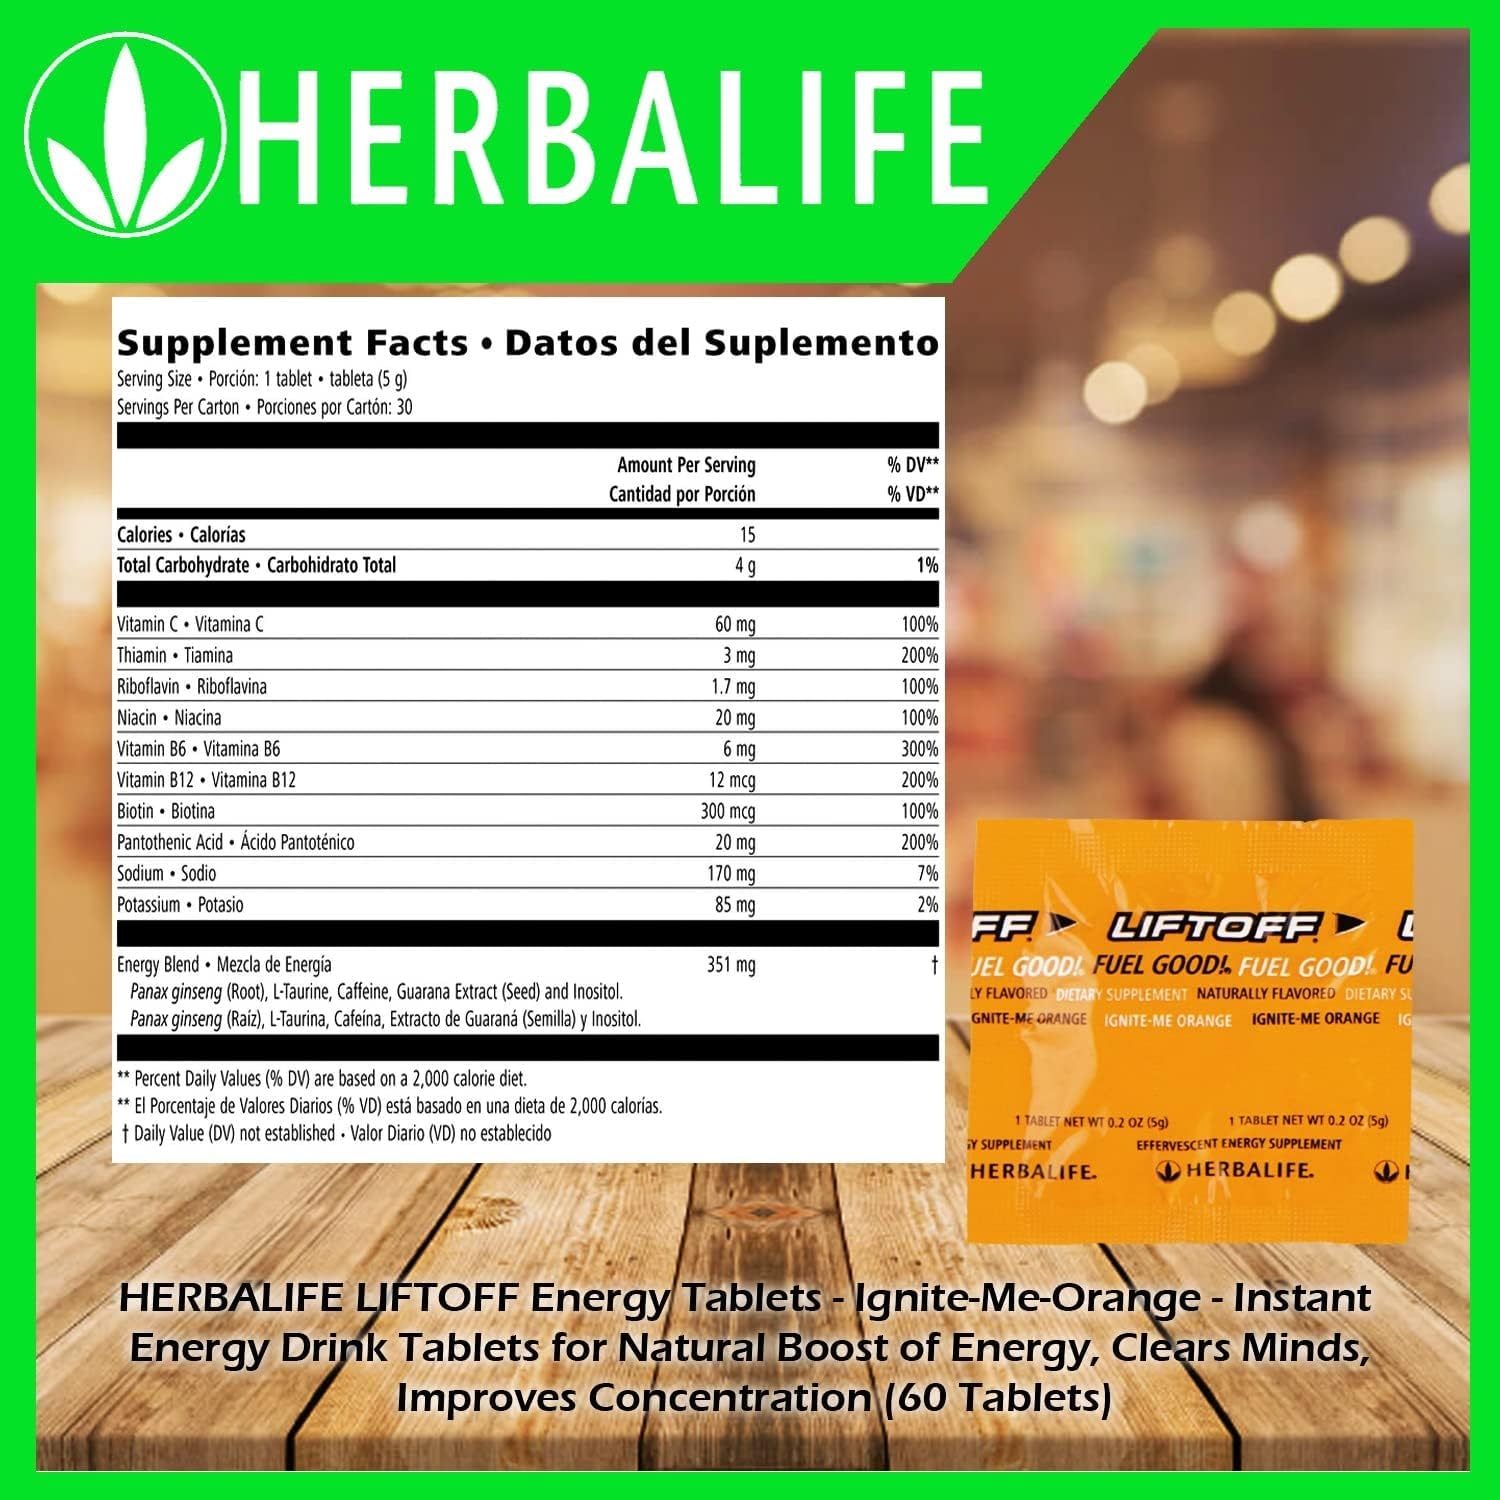 Herbalife HERBALIFE LIFTOFF Energy Tablets - Ignite-Me-Orange - Instant Energy Drink Tablets for Natural Boost of Energy, Clears Minds, Improves Concentration (60 Tablets) 60 Count (Pack of 1)